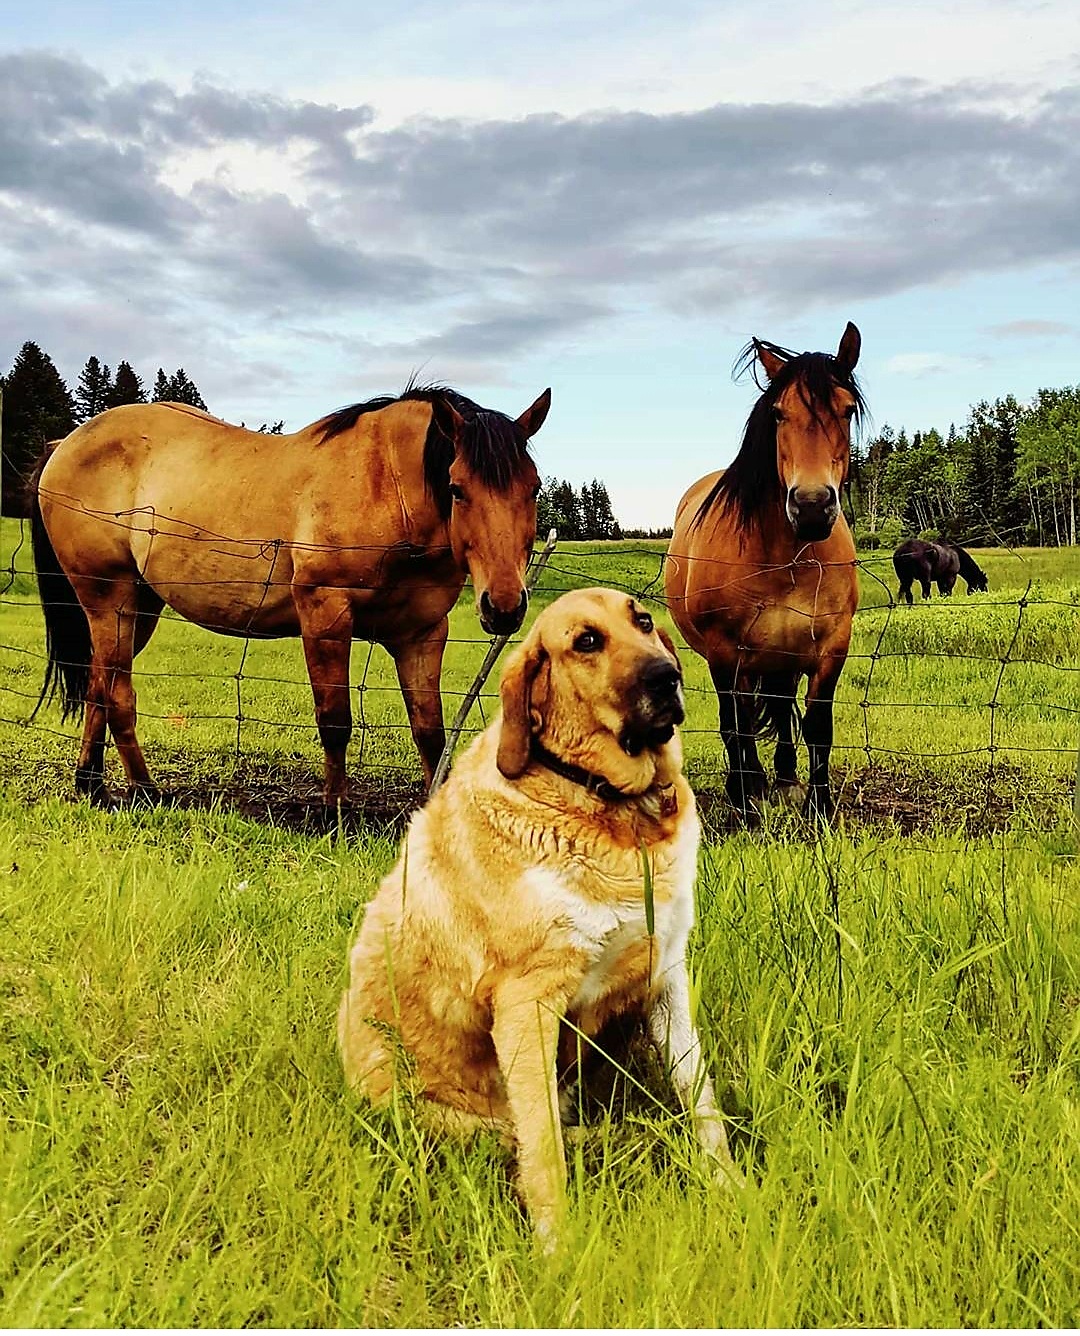 A large dog sitting on the grass in front of two horses.